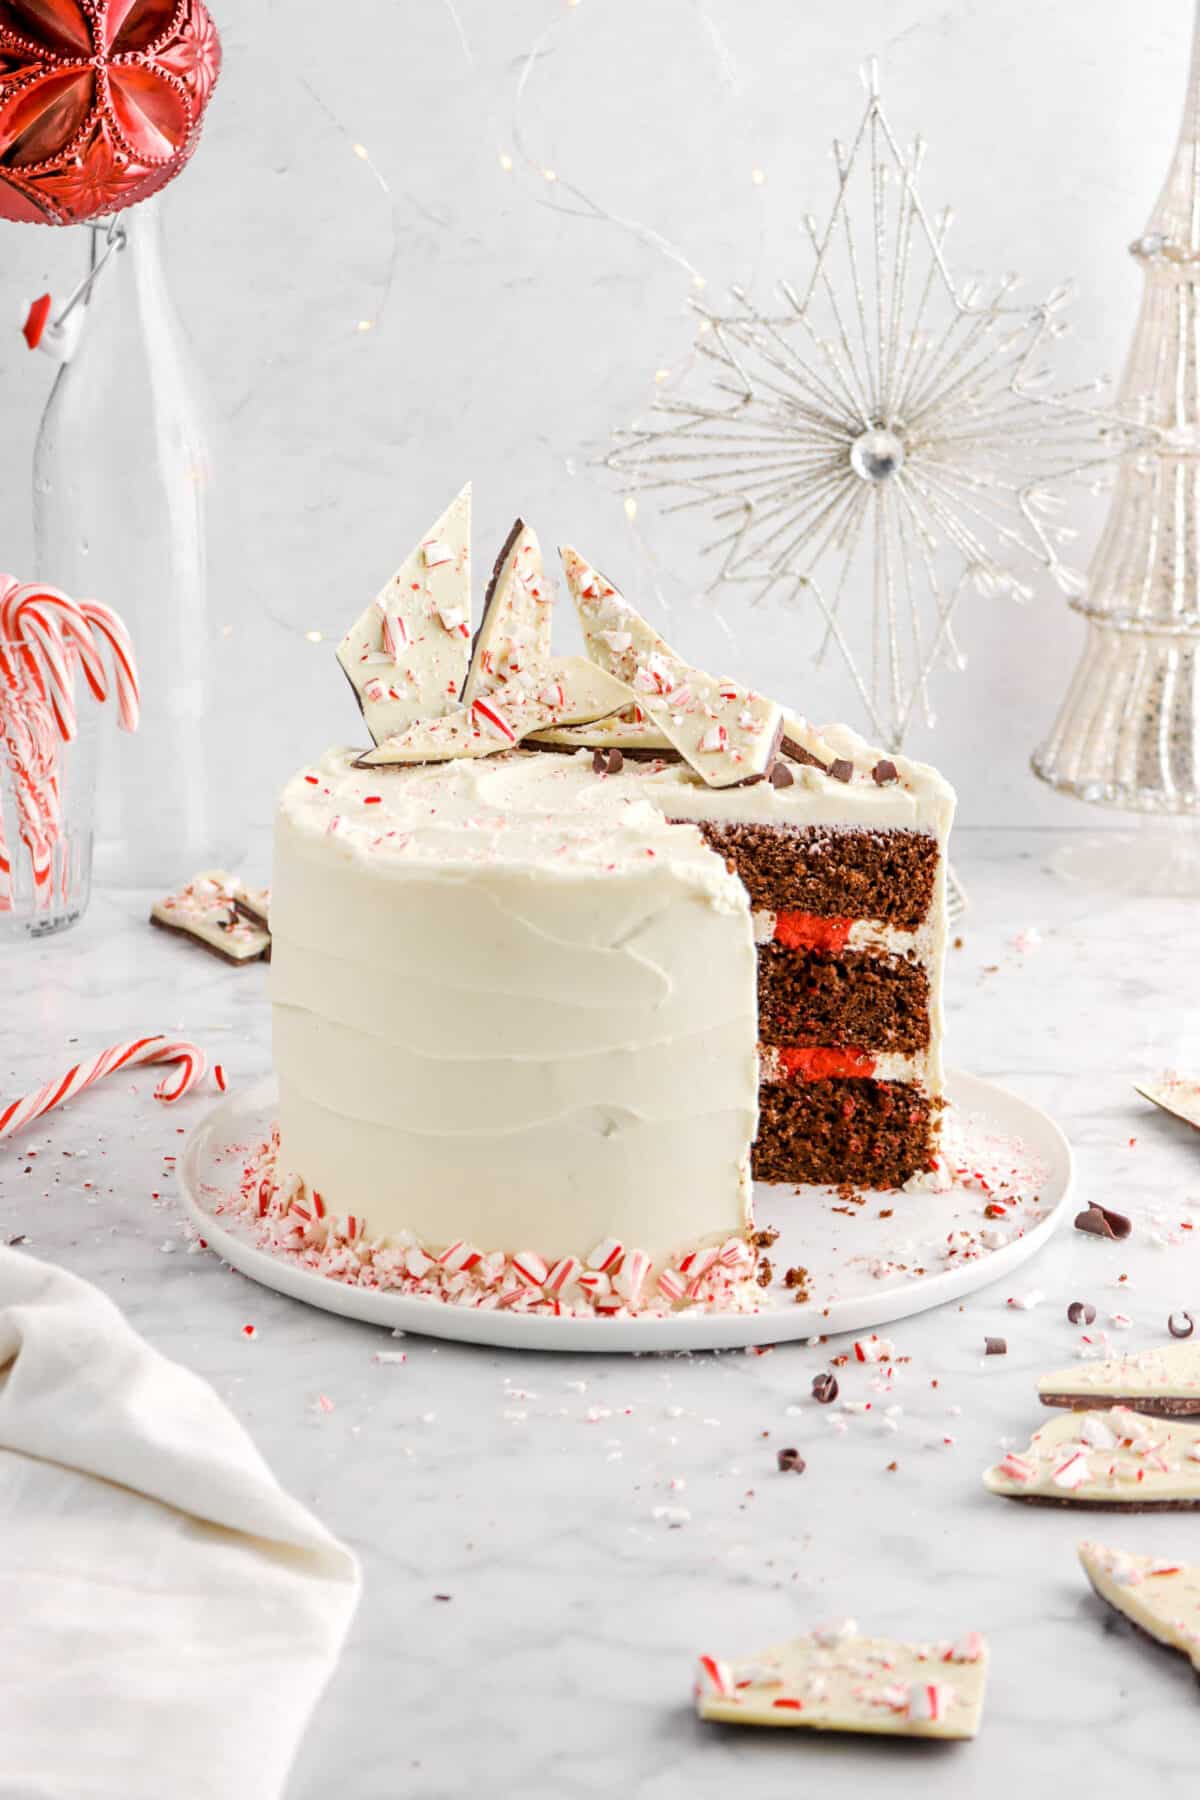 chocolate peppermint cake with slices taken out of cake on white plate with peppermint bark on top, decorative star, mercury glass tree, and red ornament